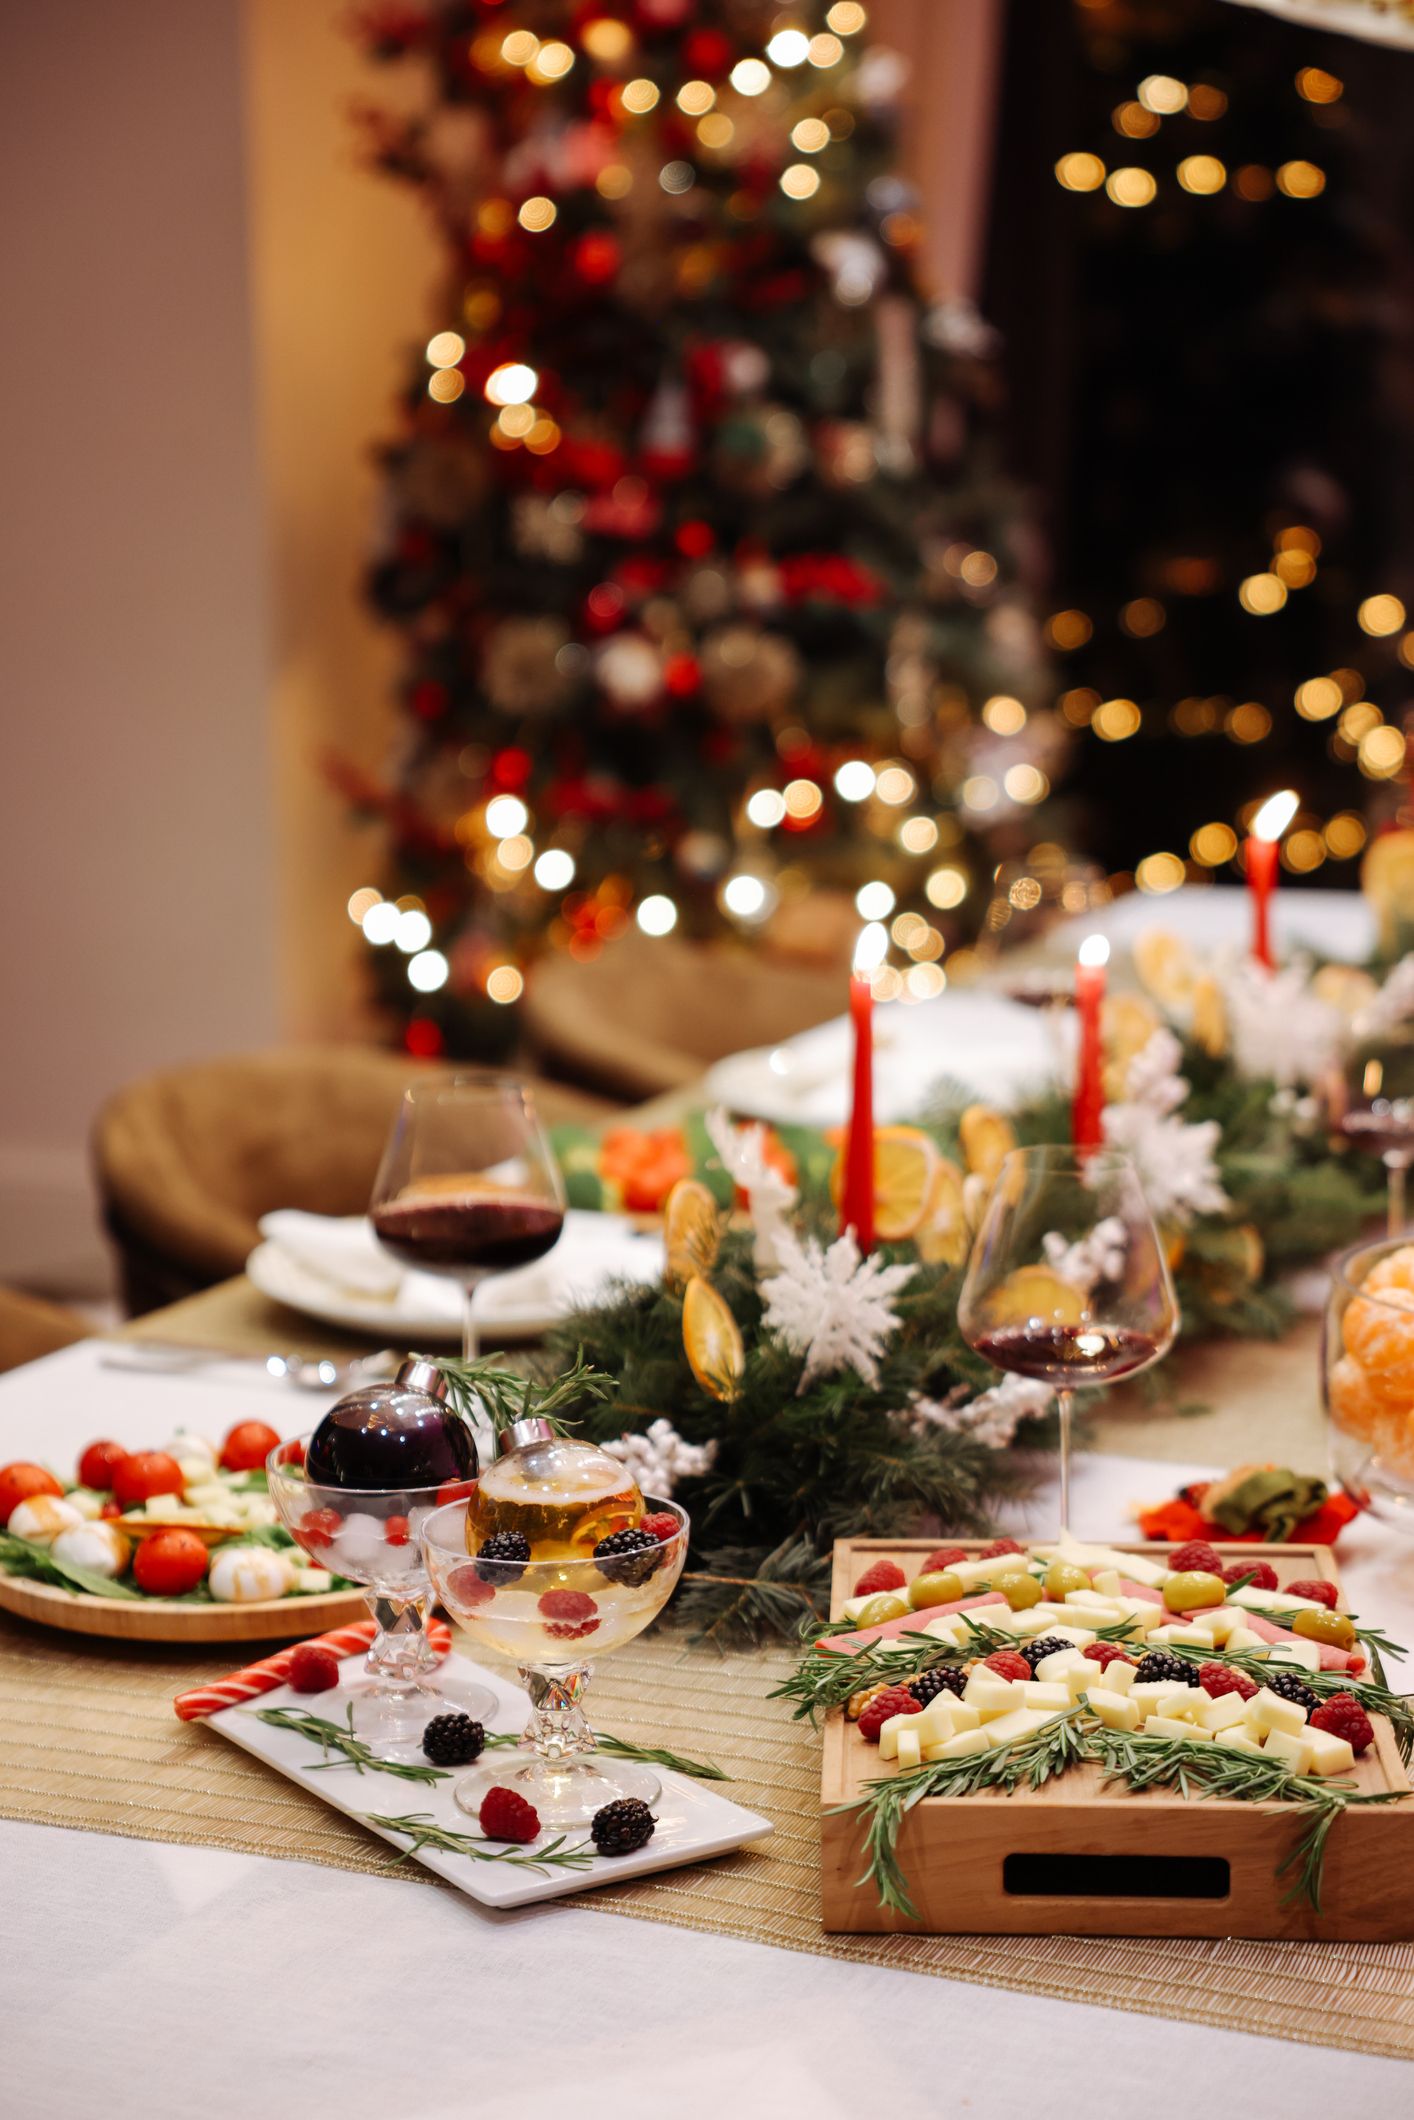 Five Tips for Planning the Perfect Company Holiday Party